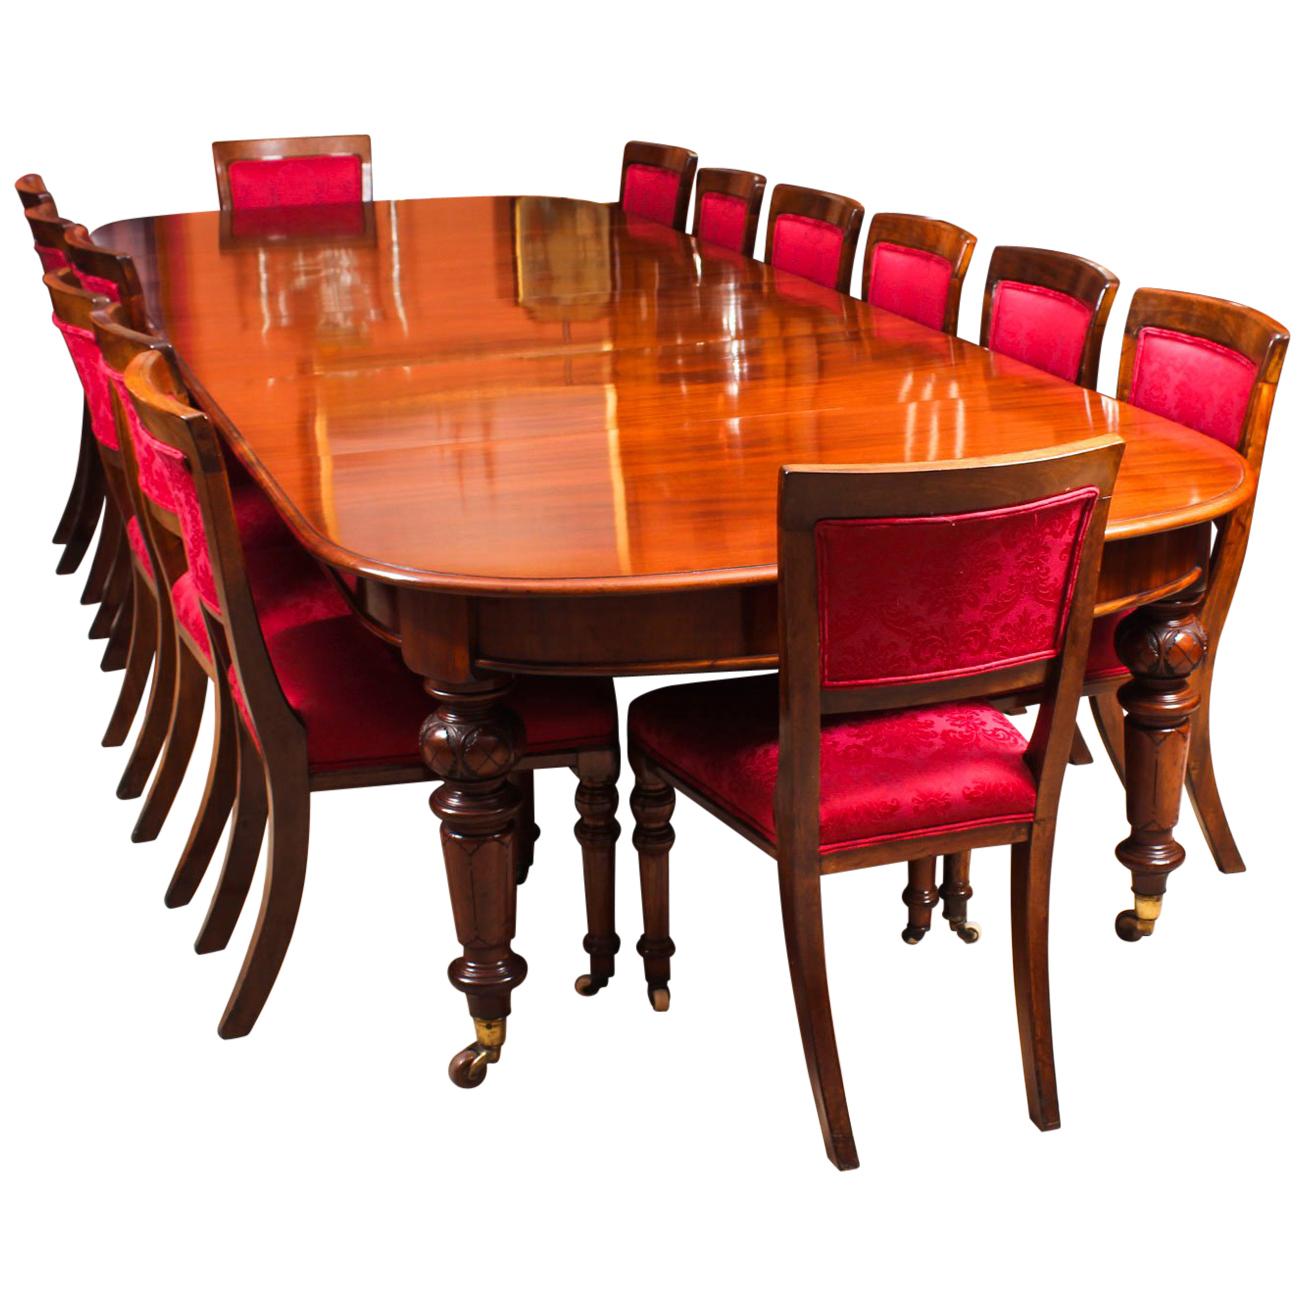 Antique Victorian D-End Mahogany Dining Table and 14 Chairs, 19th Century